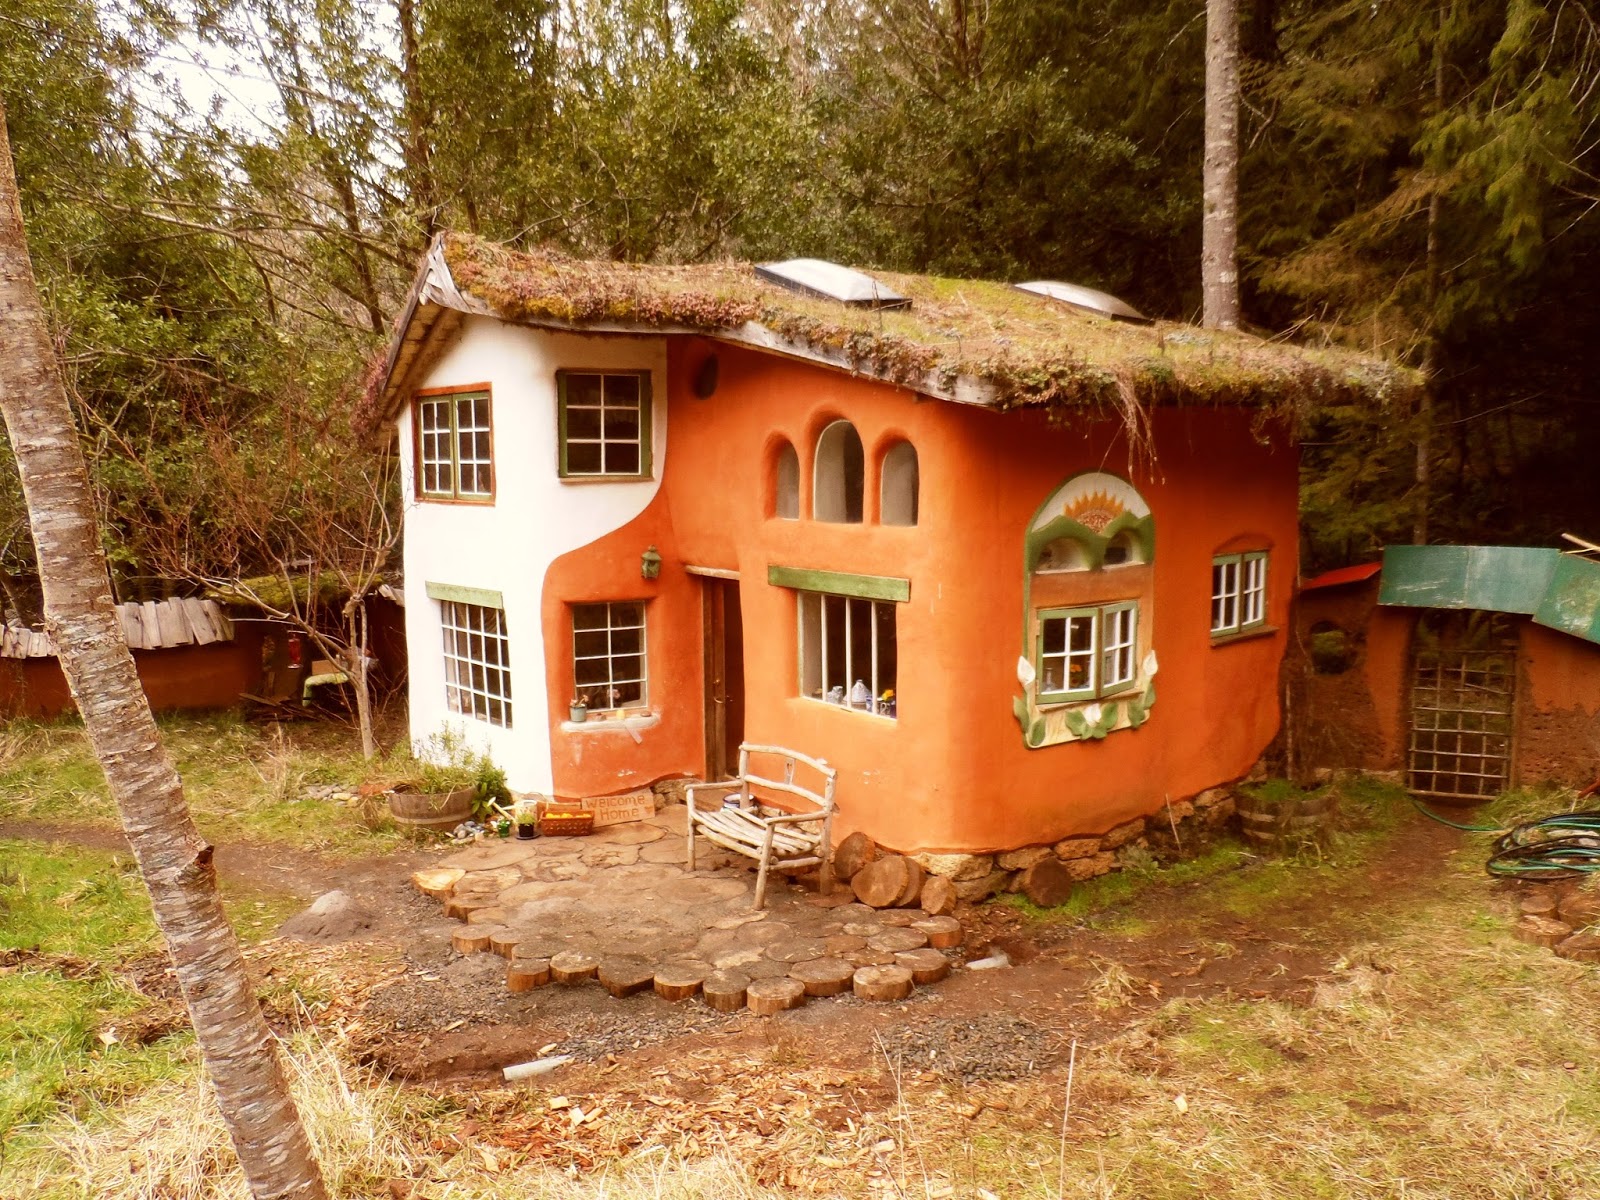 This beautiful tiny cob house on the coast in Oregon was built for very little money. It has been lovingly inhabited for several years now without the benefit of code approval. There is always a chance that houses built without approval could be condemned, but sometimes the risk is worth it.